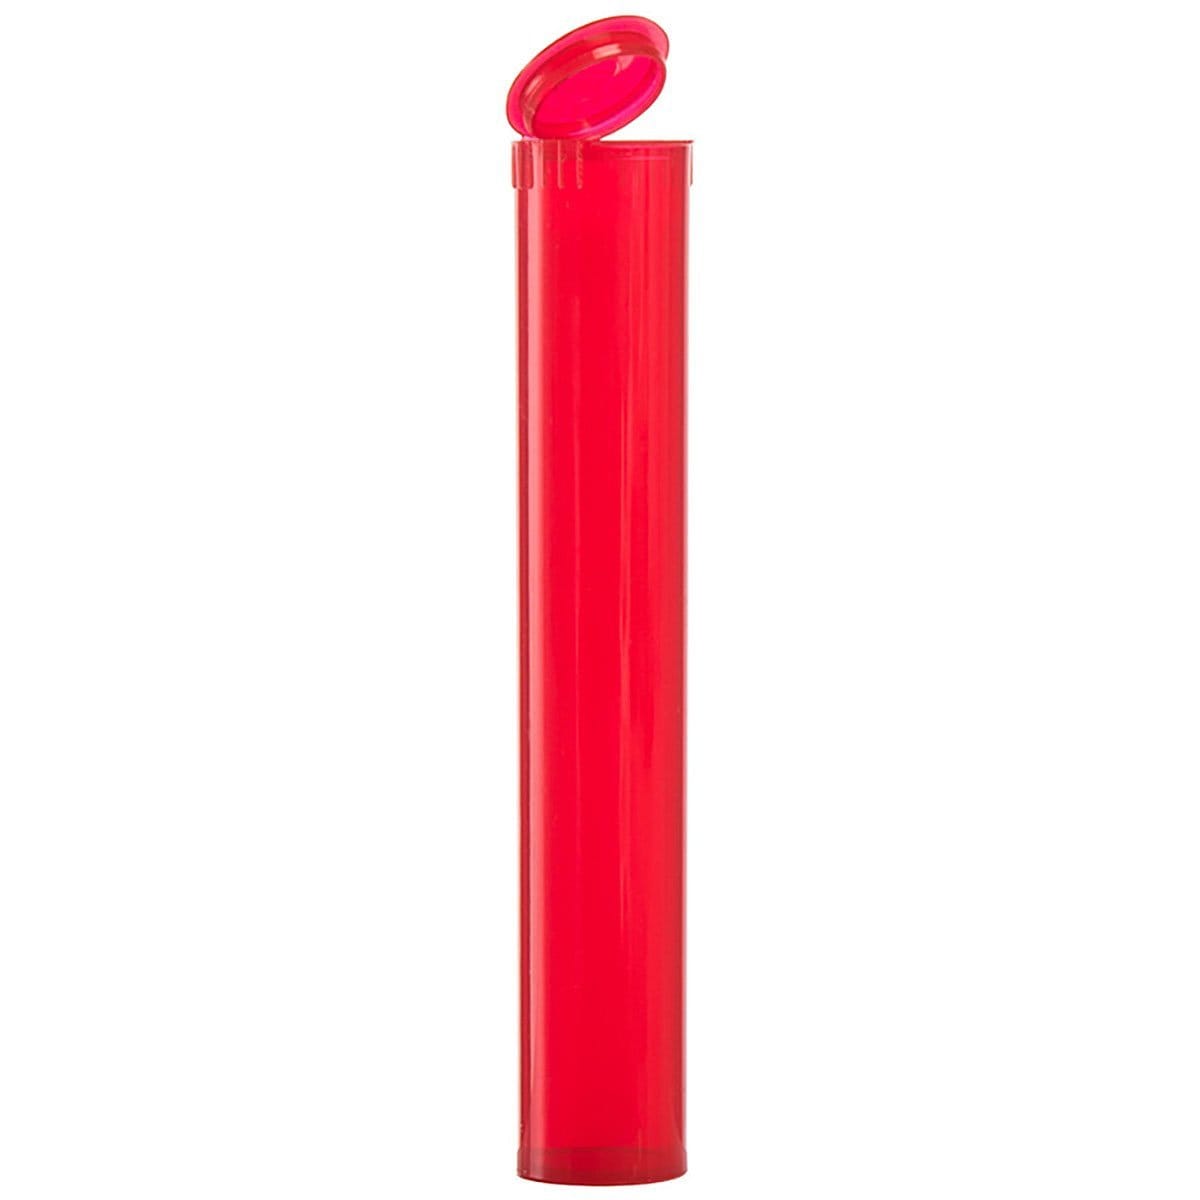 Translucent Red Translucent Squeeze Top Child-Resistant Pre-Roll Tube | 94 mm